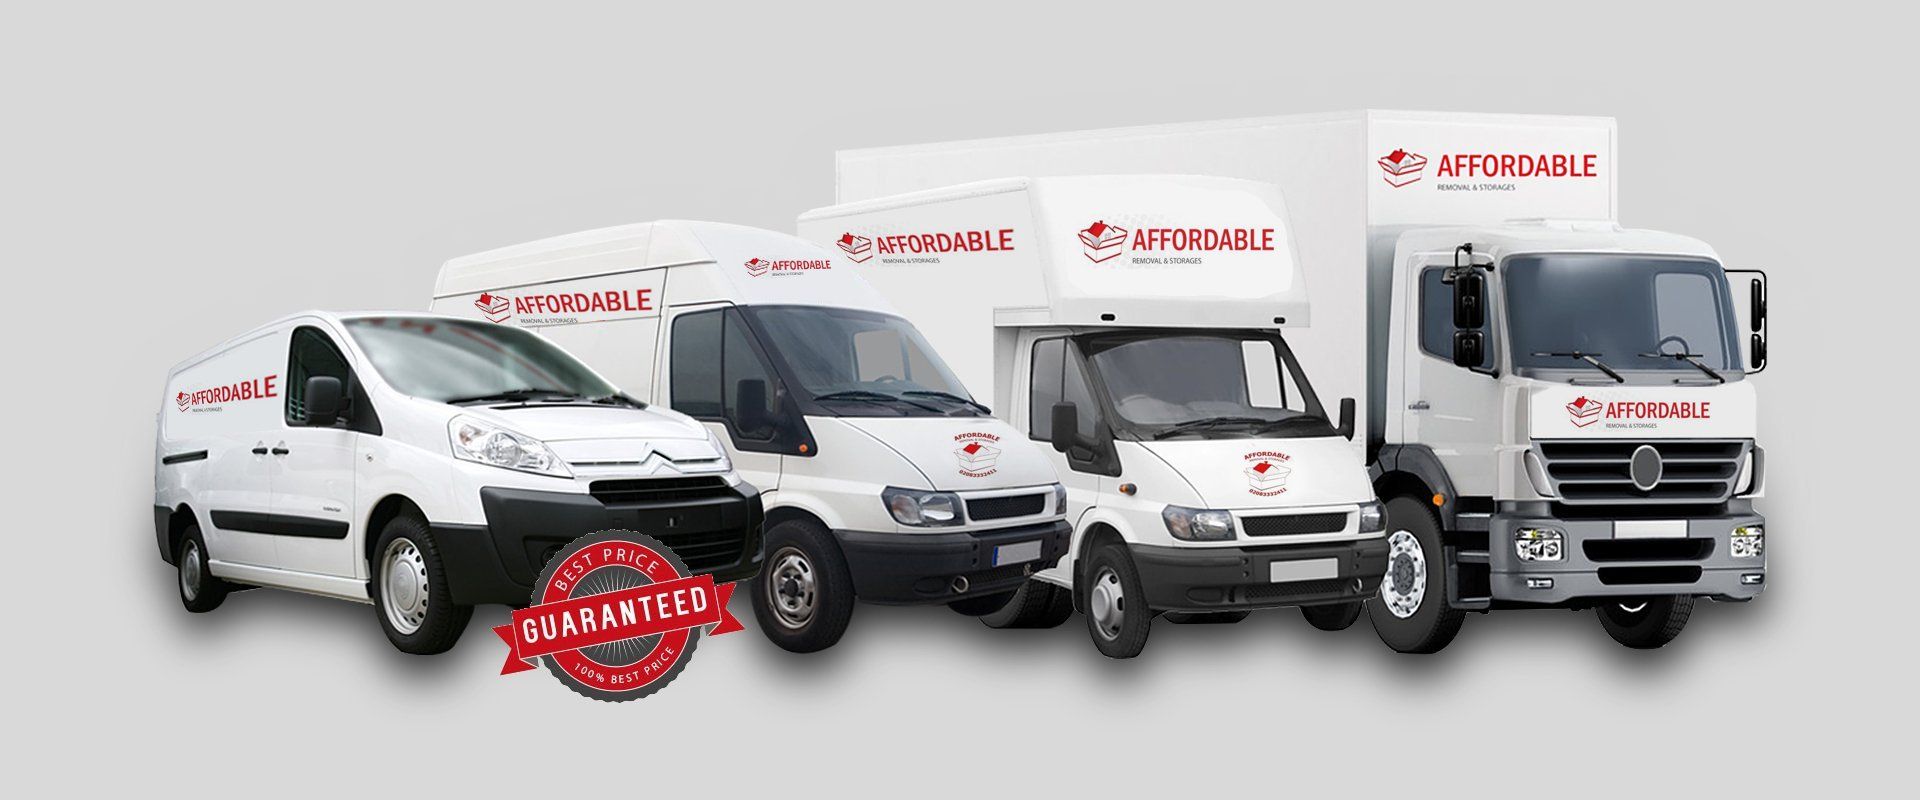 Affordable removal & storage vehicles